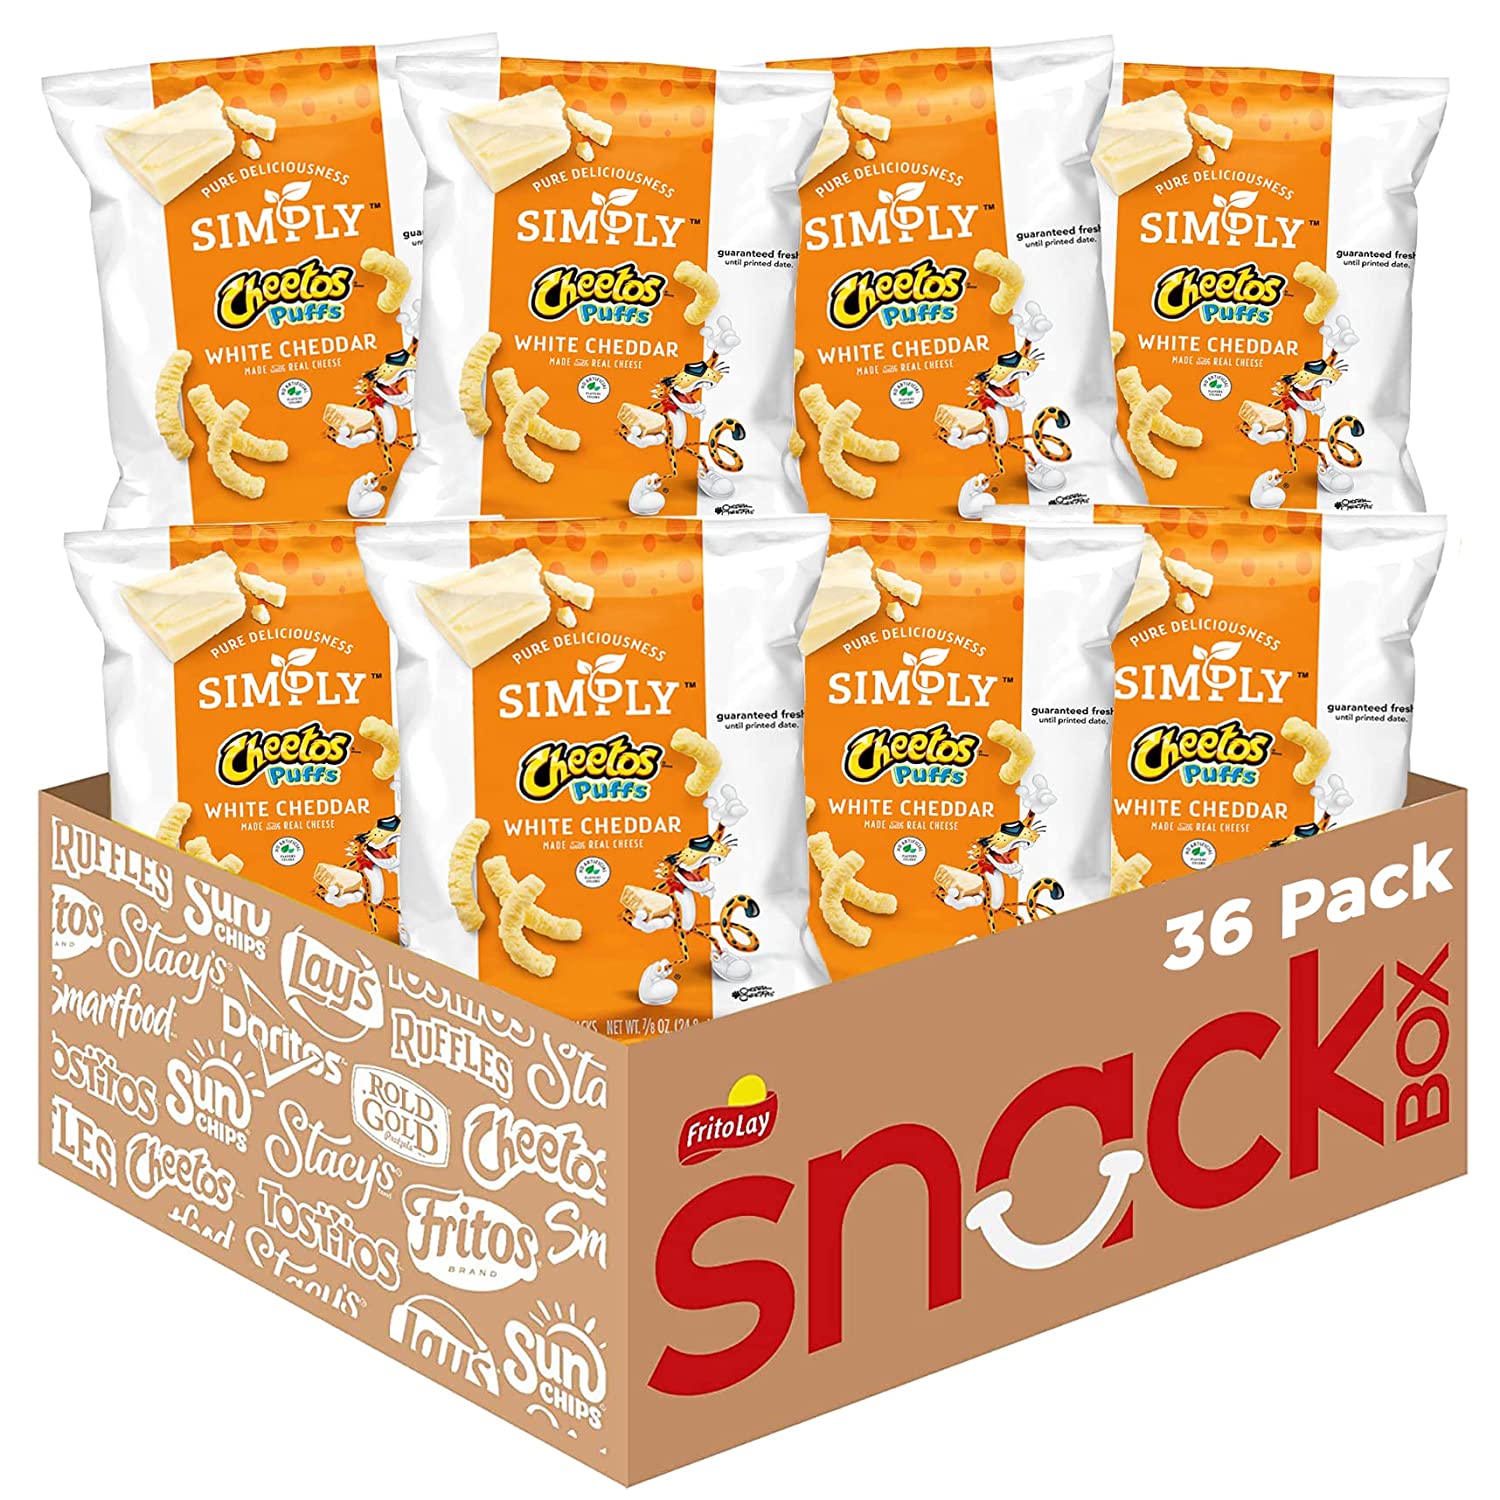 Simply Cheetos Puffs White Cheddar Cheese Flavored Snacks0.875 Ounce Pack of 36